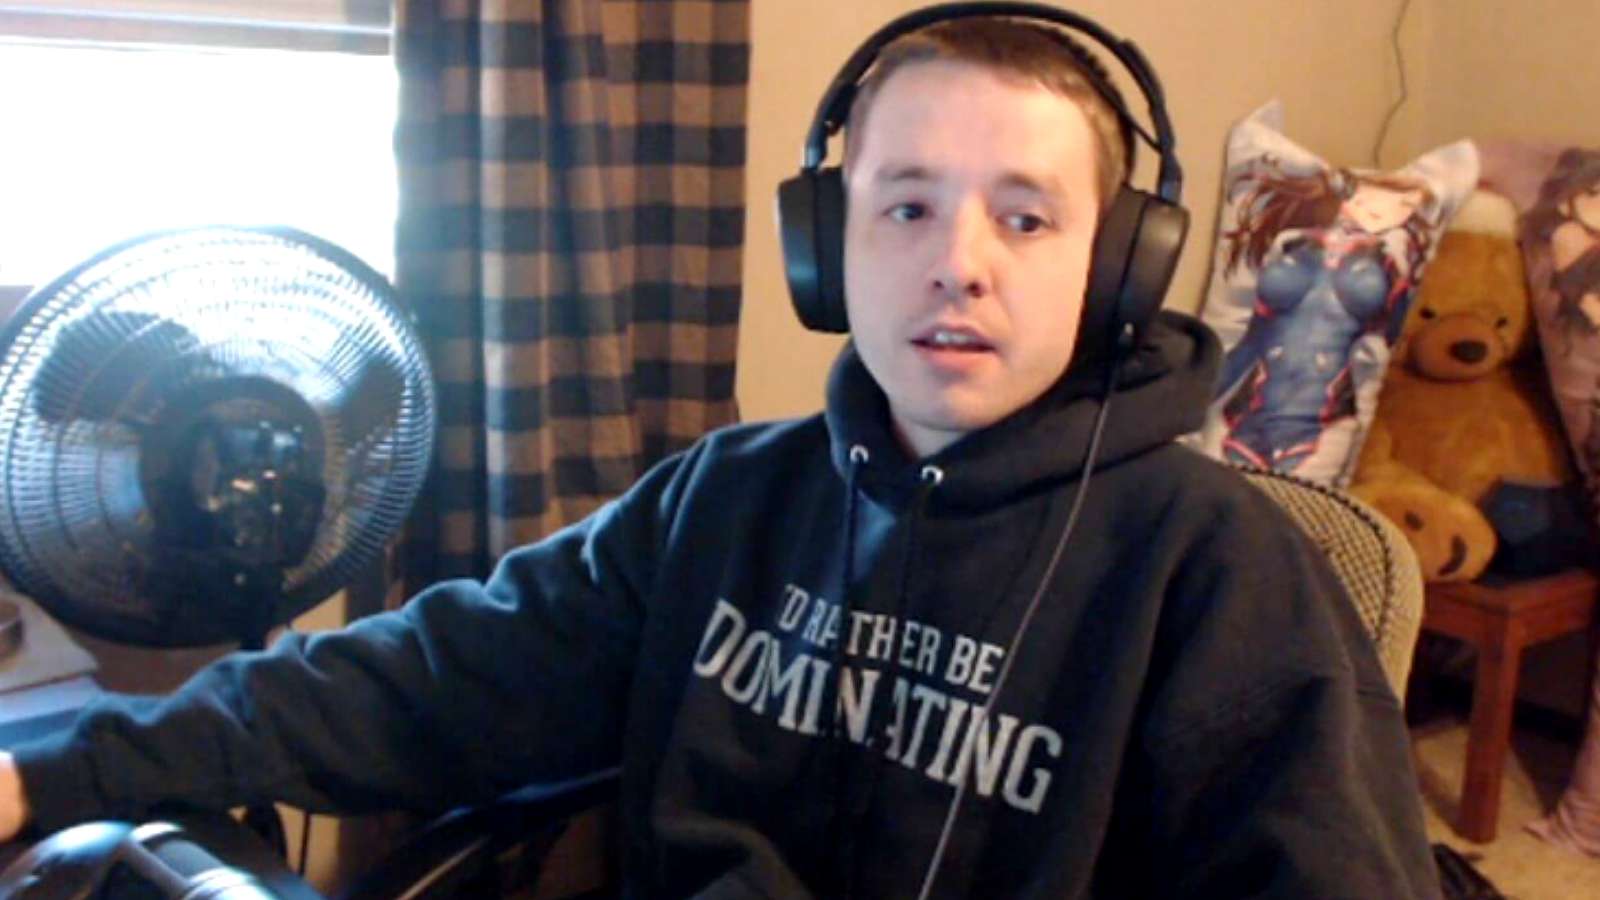 Dellor streaming on Twitch